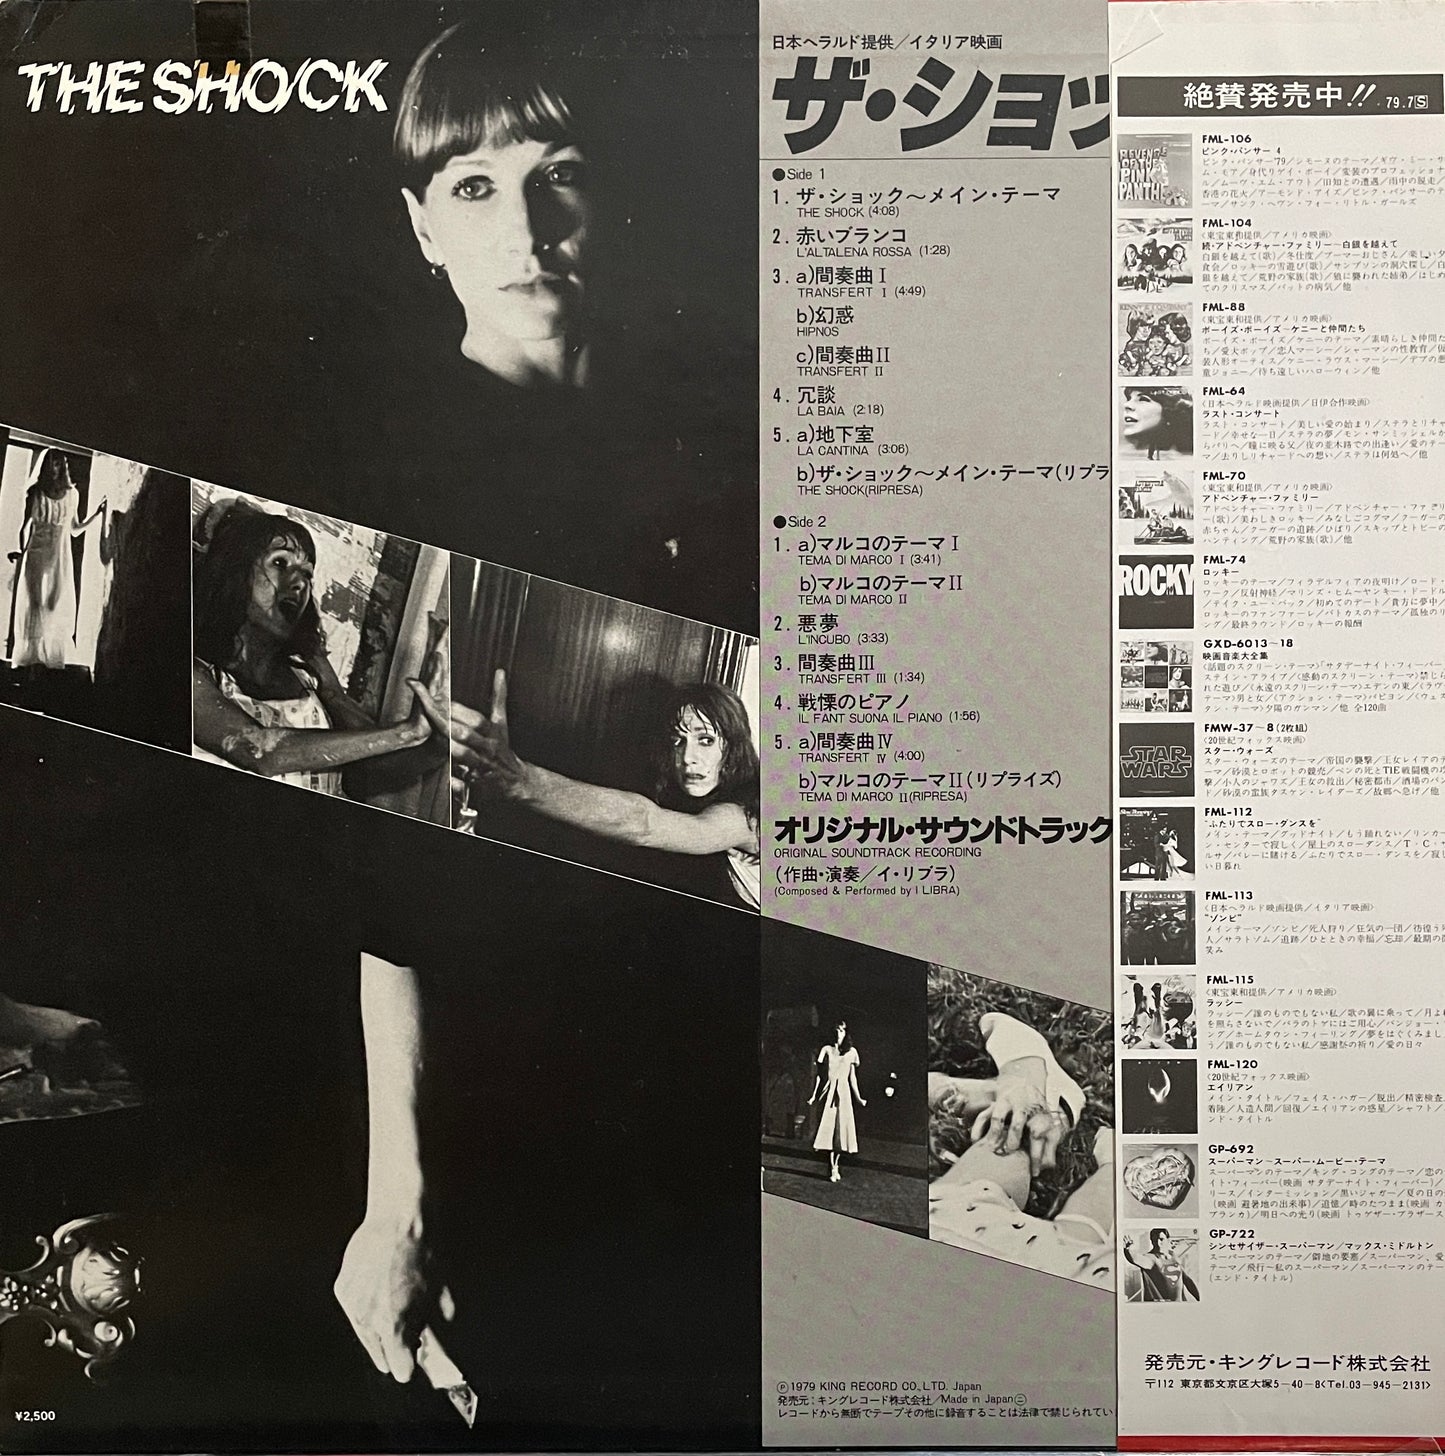 The Shock (1979)